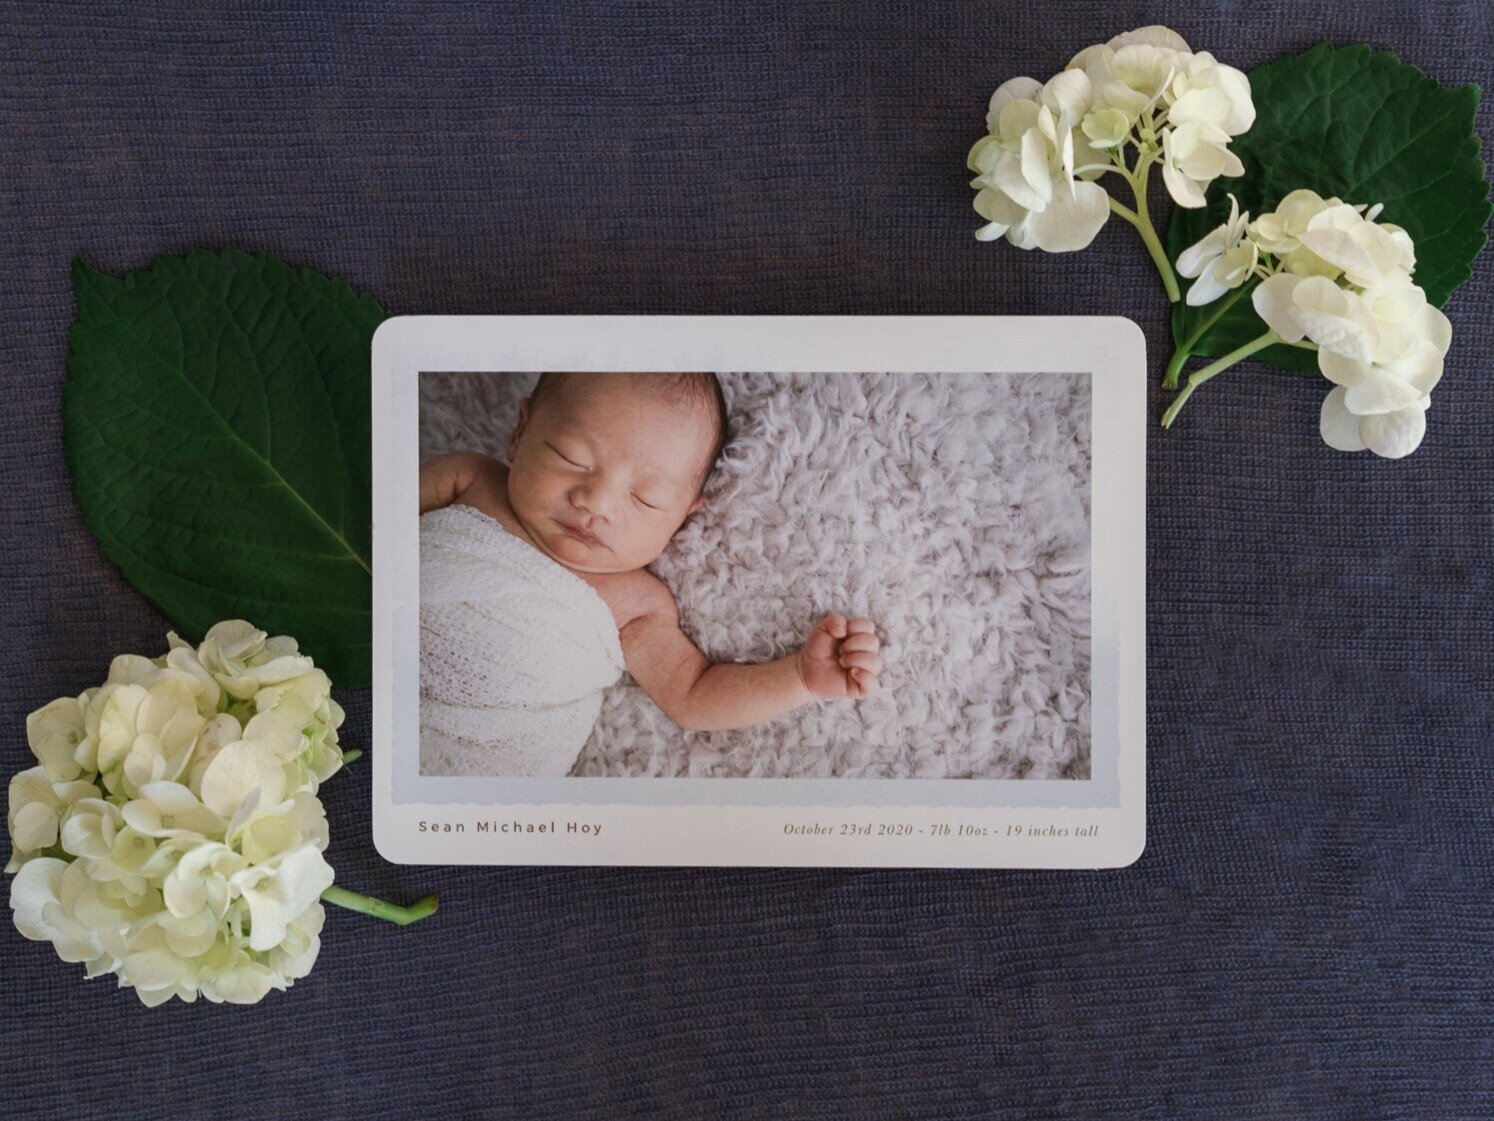 Baby Announcement Photo Card from Basic Invite